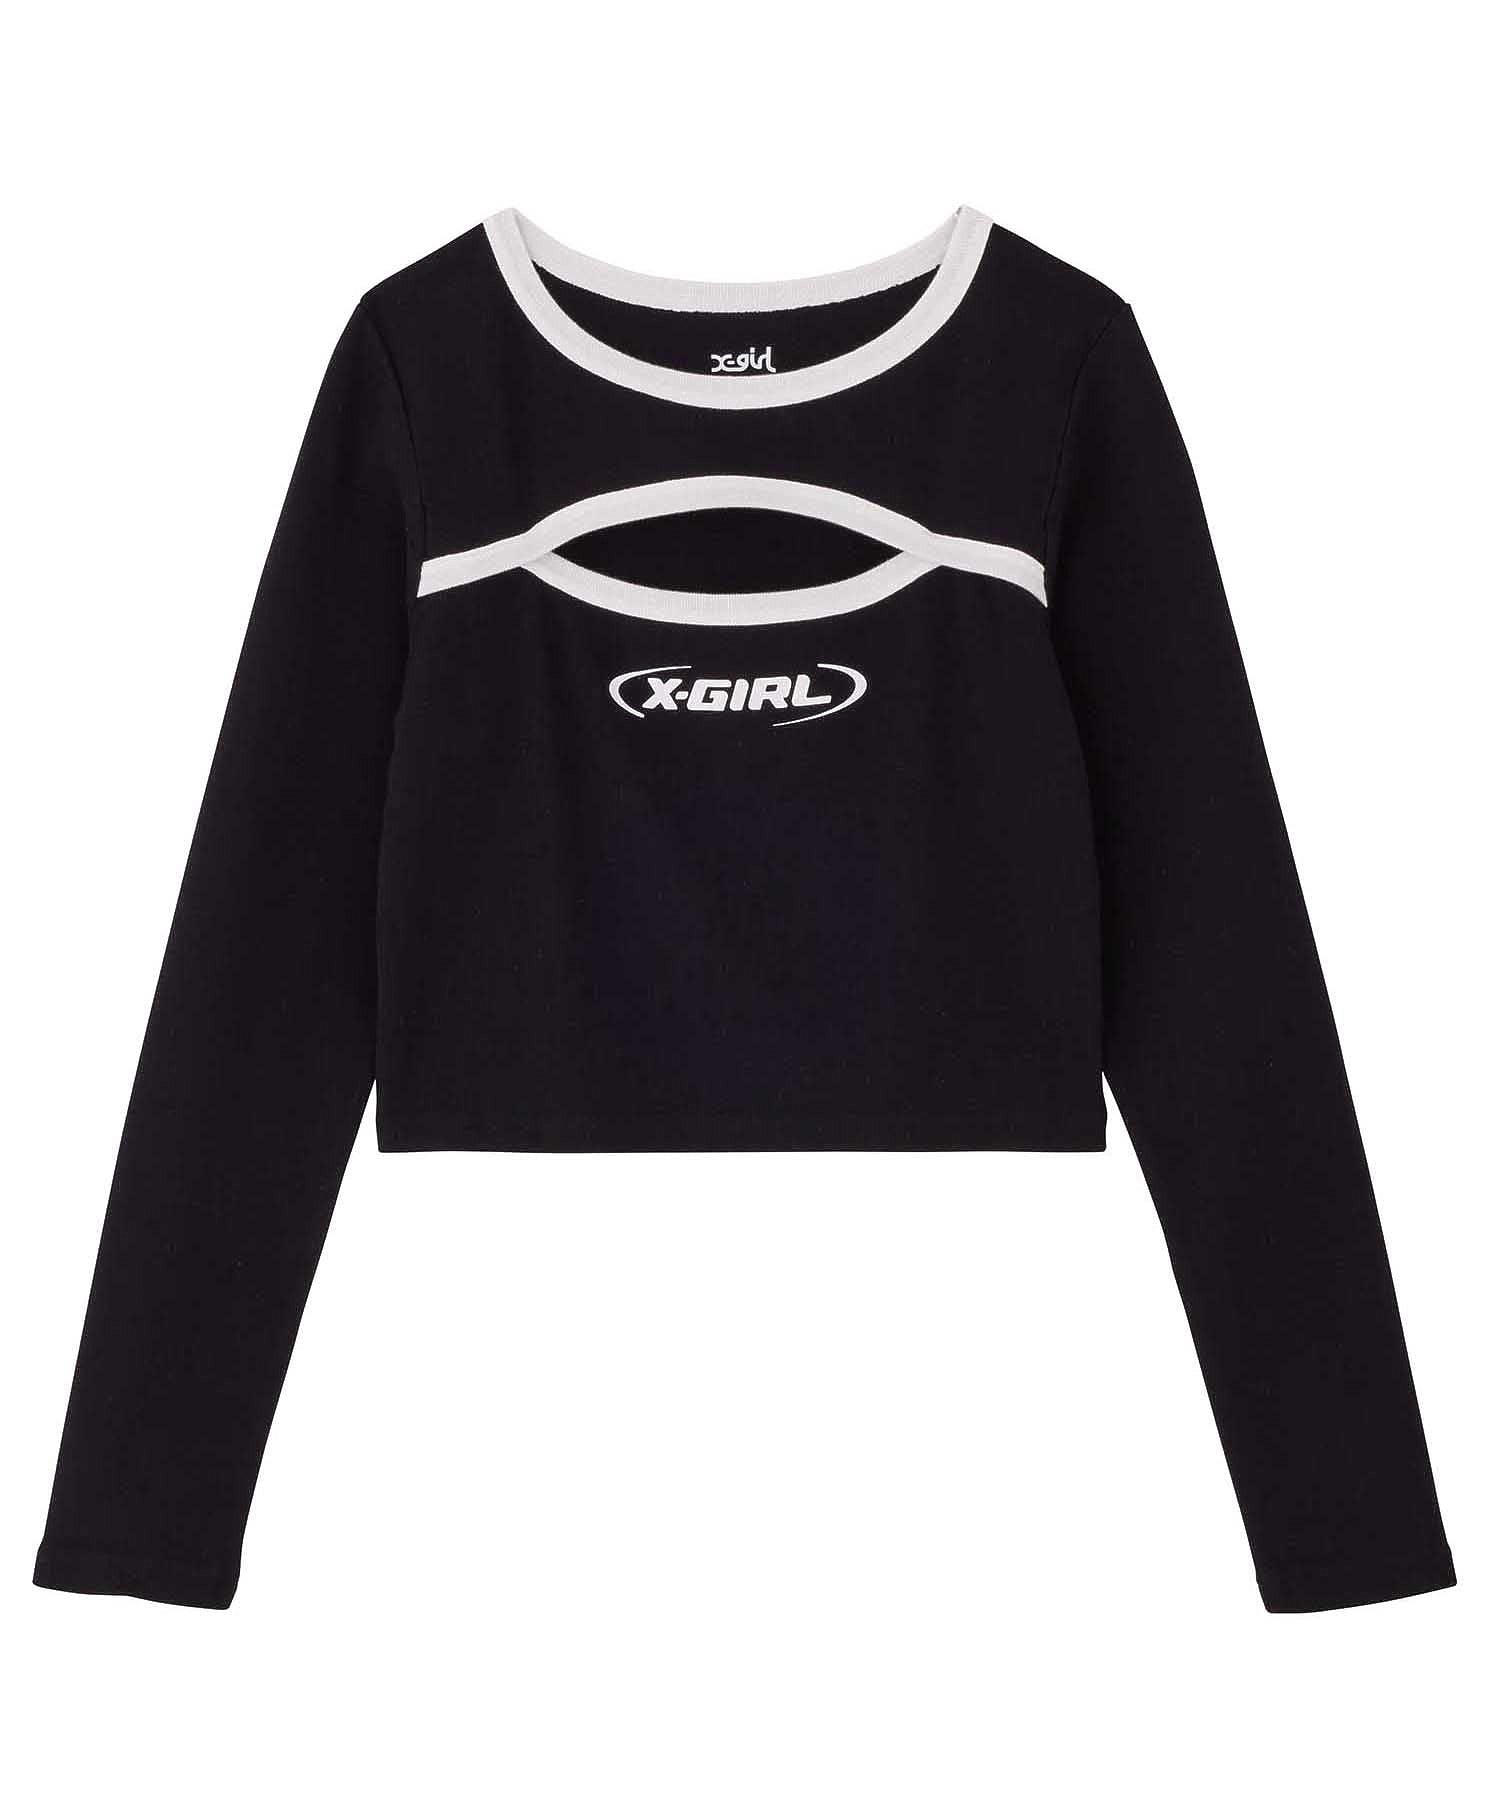 FRONT CUTOUT L/S BABY TEE X-girl